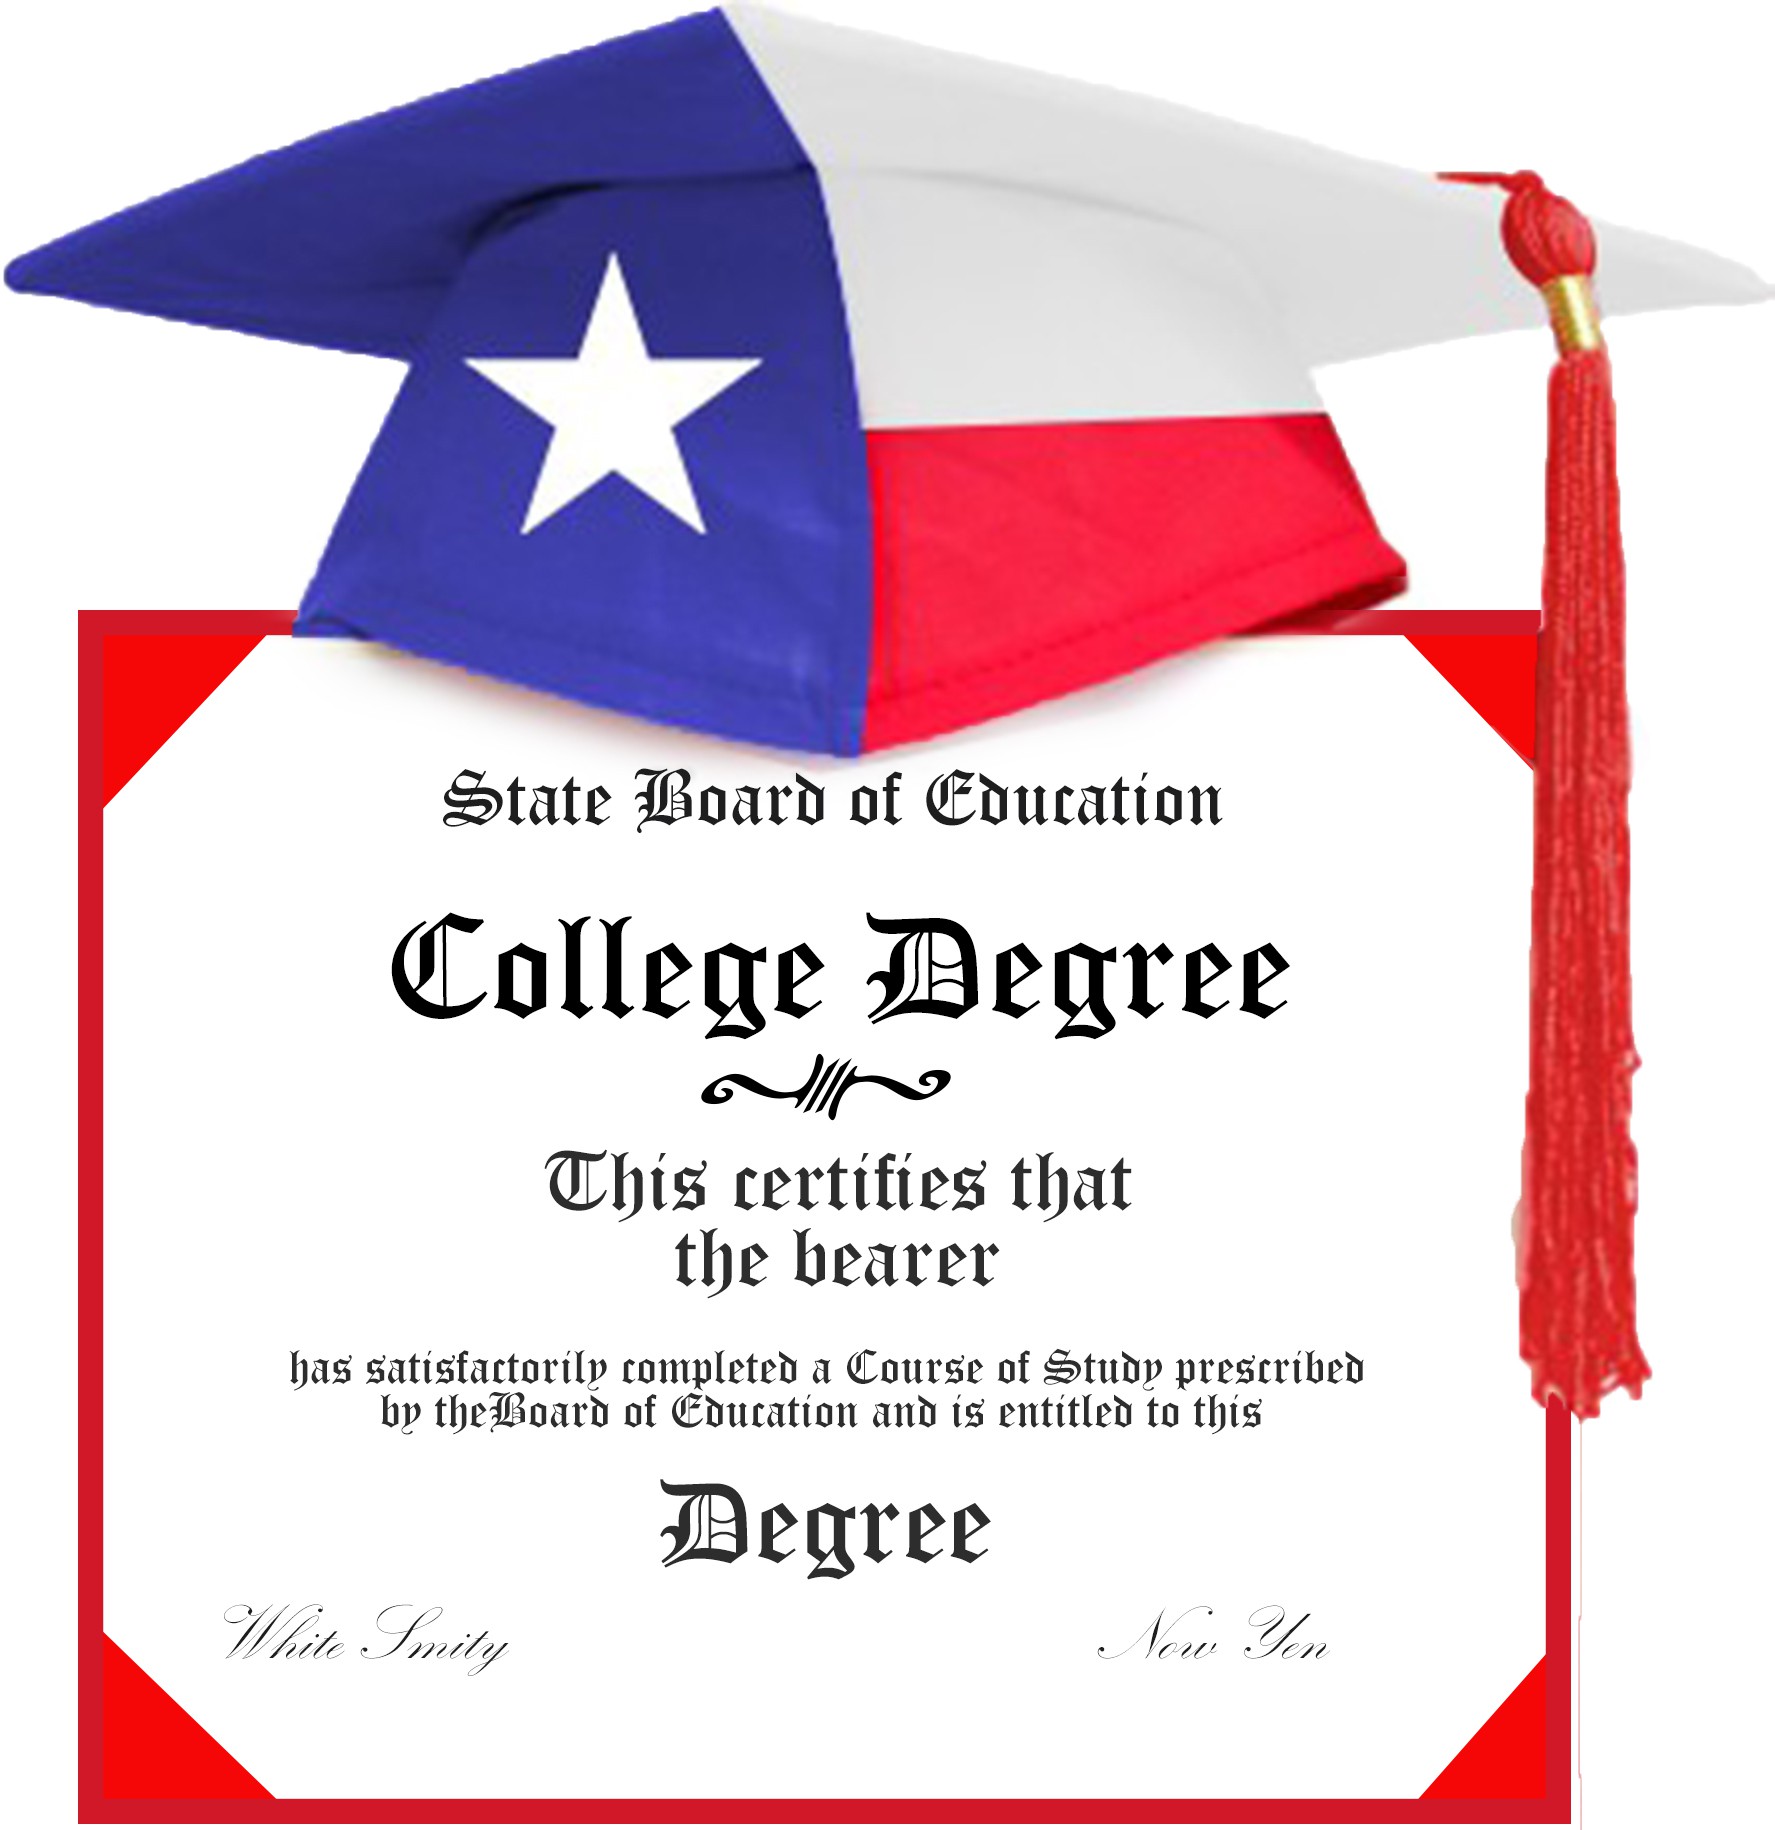 The University of Texas Medical Branch at Galveston College Degree